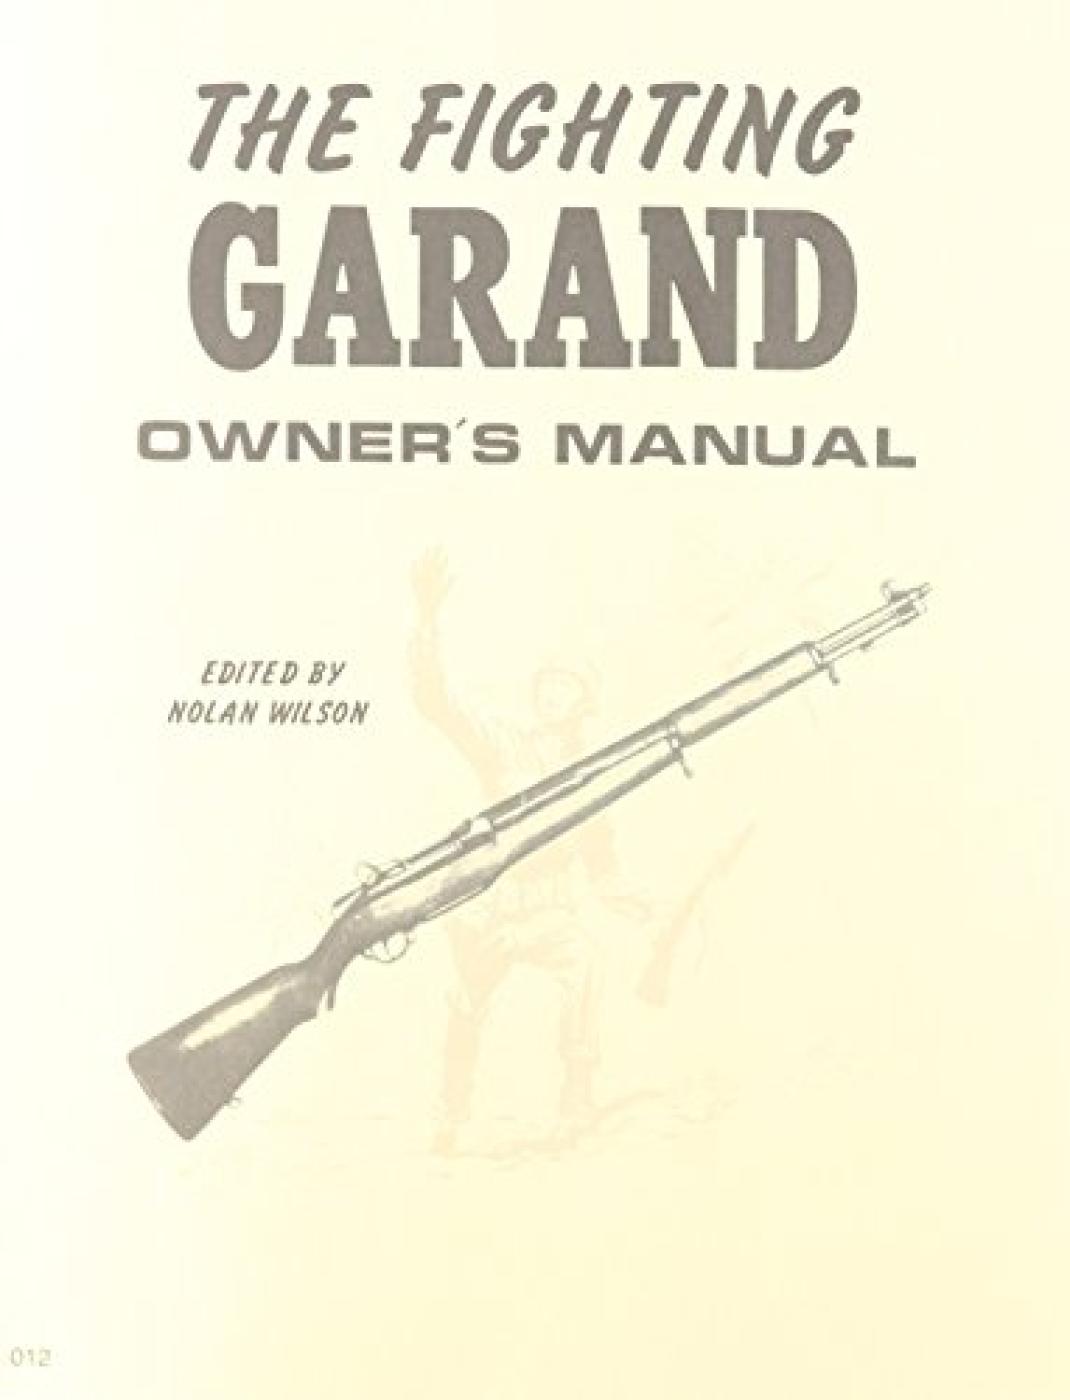 The Fighting Garand Owners Manual